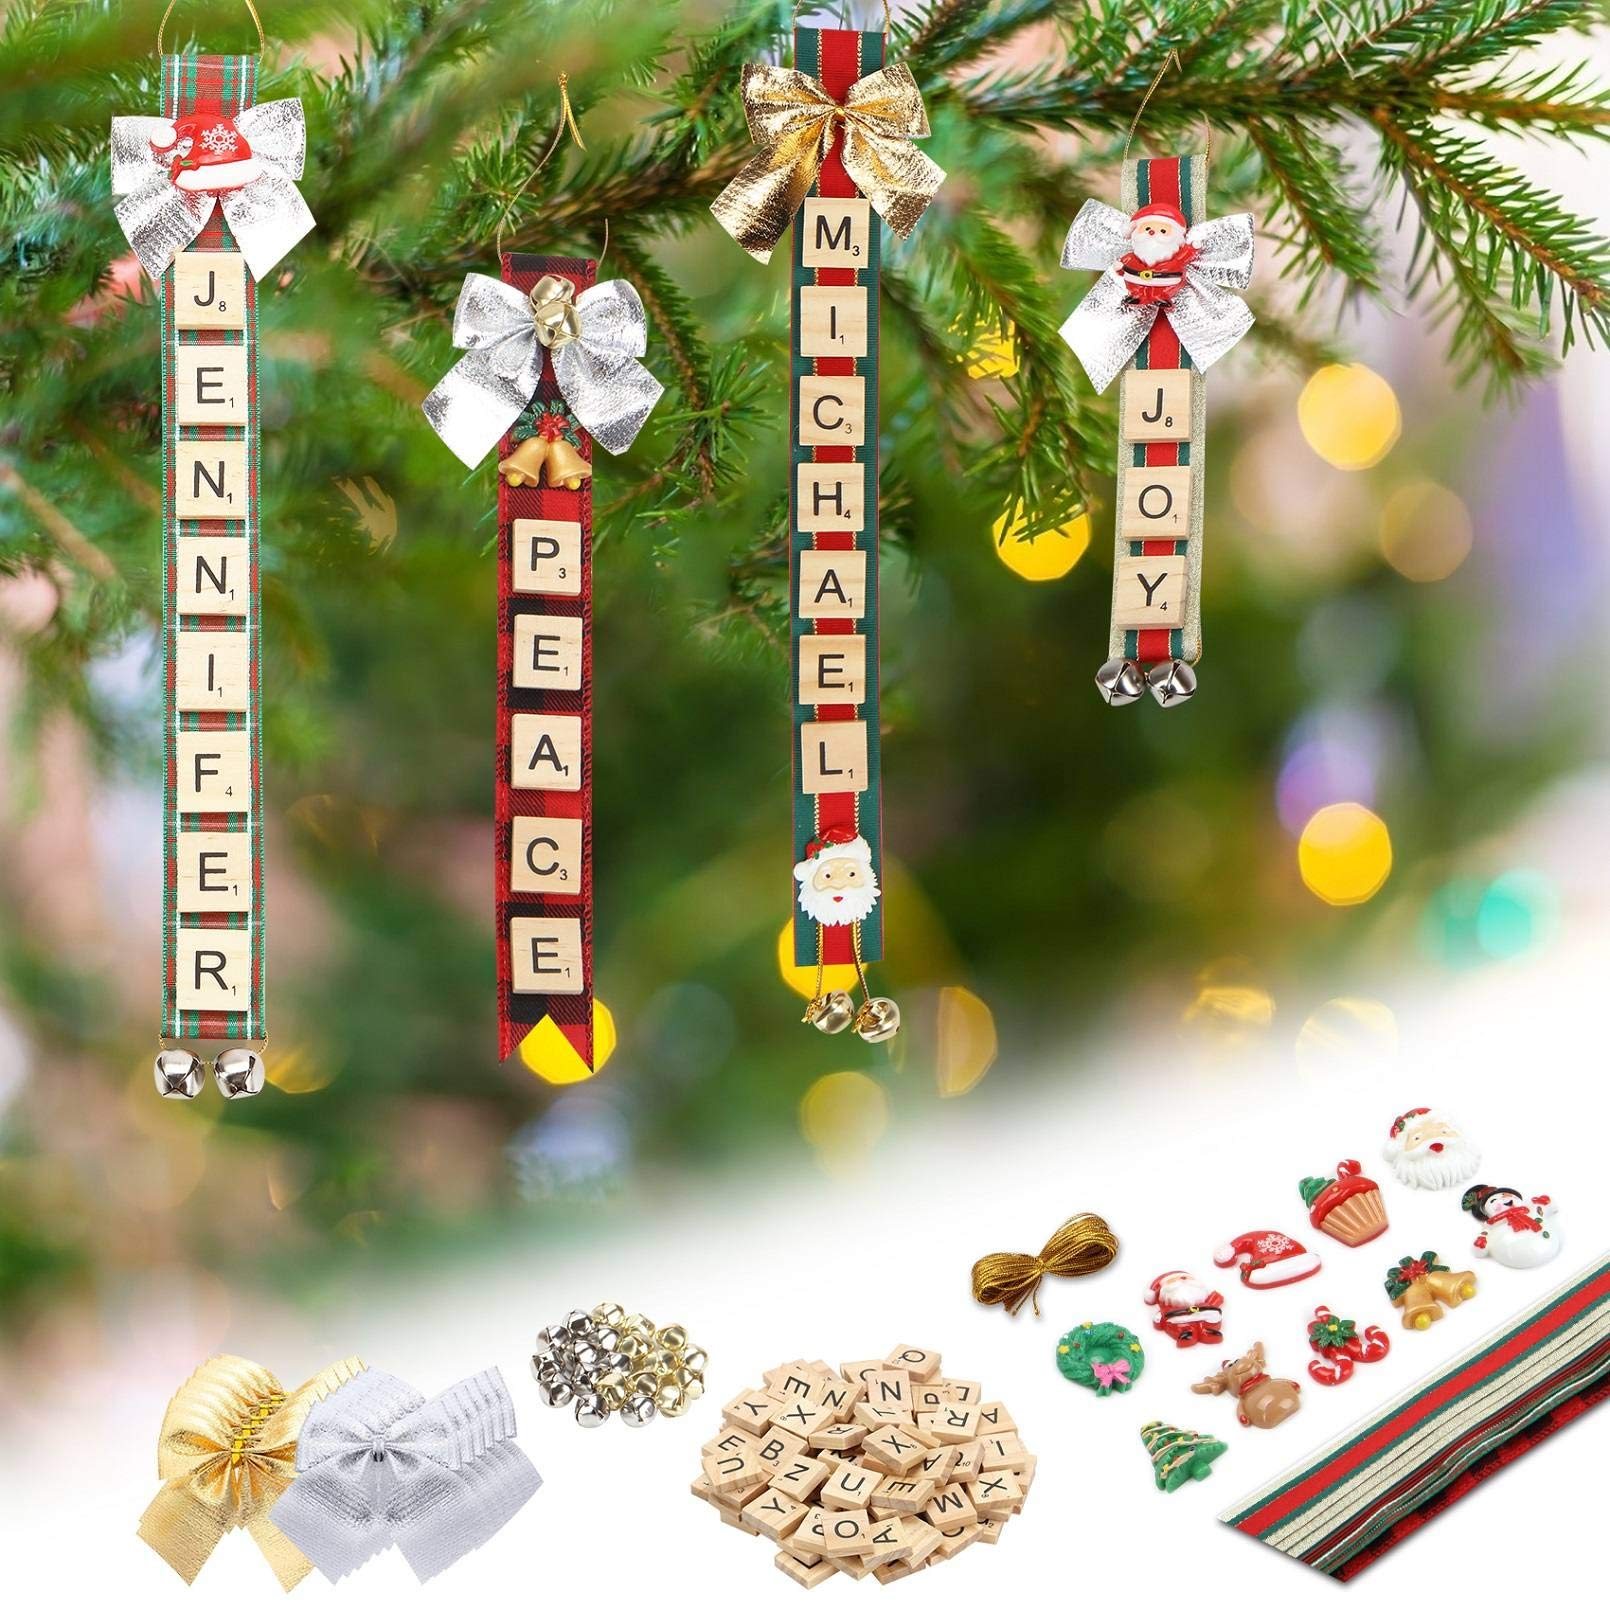 Christmas ornaments tree decorations personalized crafts for girls adults kids kit diy ribbon letter tiles bells rustic stockings name tags hanging xmas decor for gifts wreath room holiday home